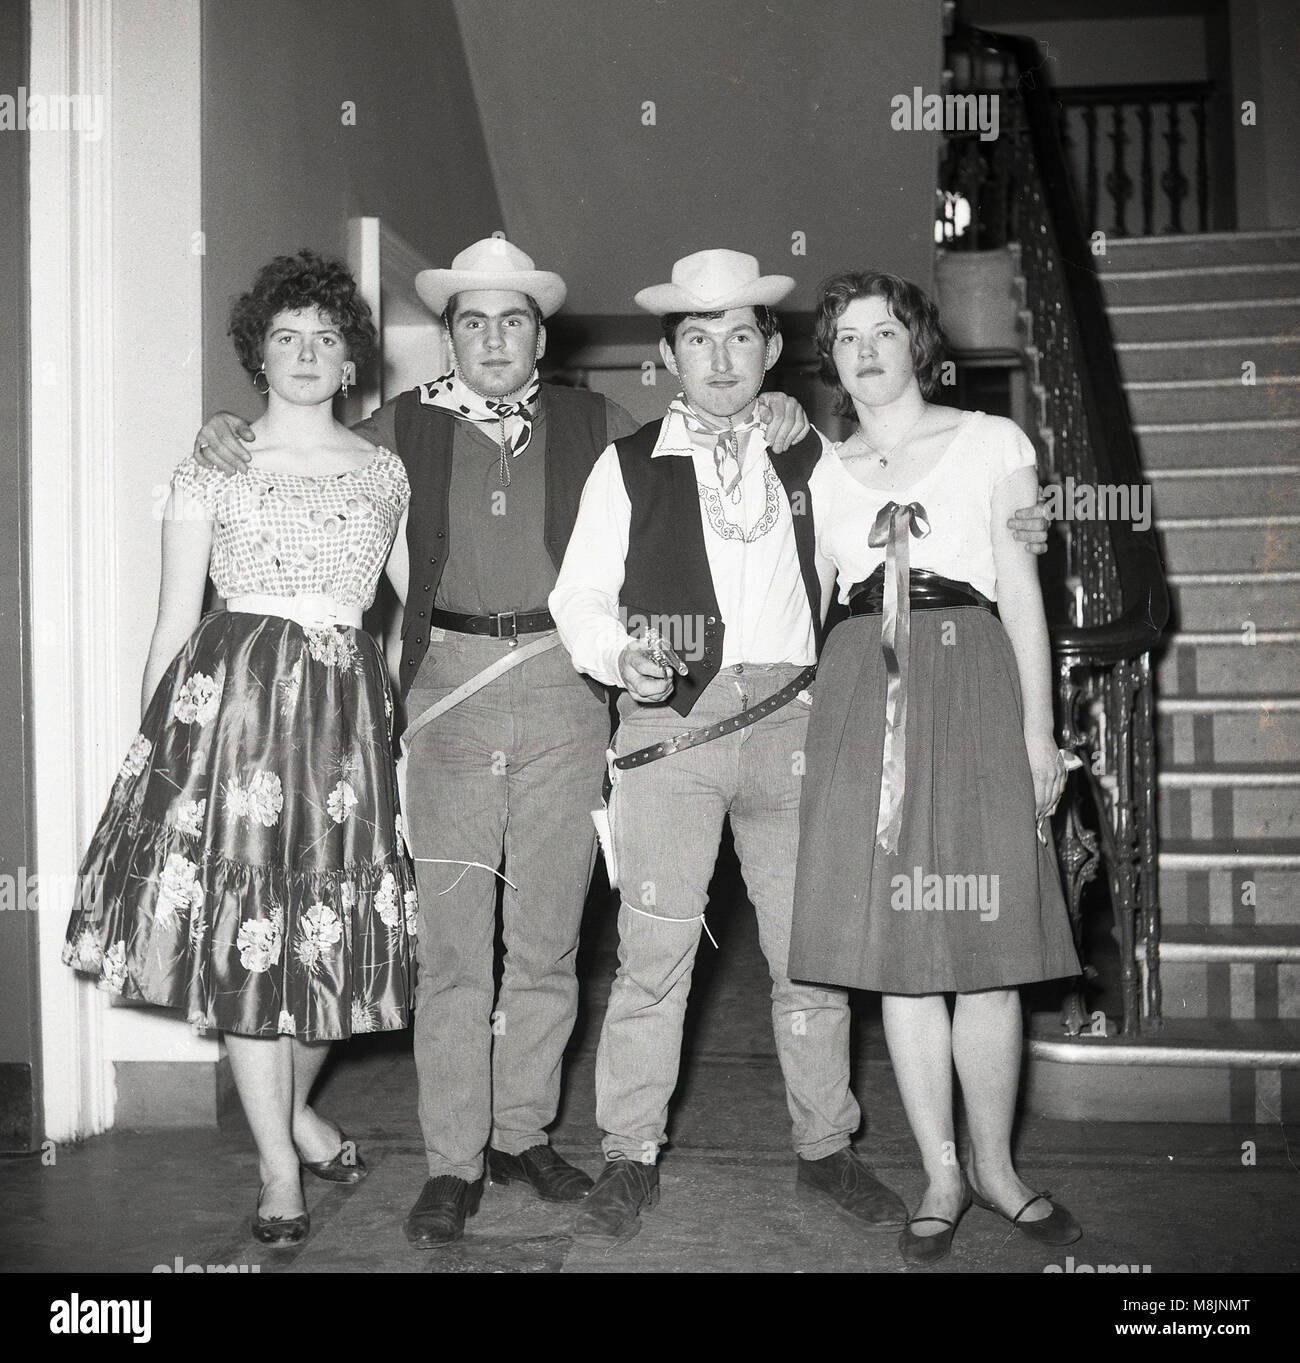 1950s, historical, people at a party wearing fancy dress outfits ot costumes, England, UK. Stock Photo